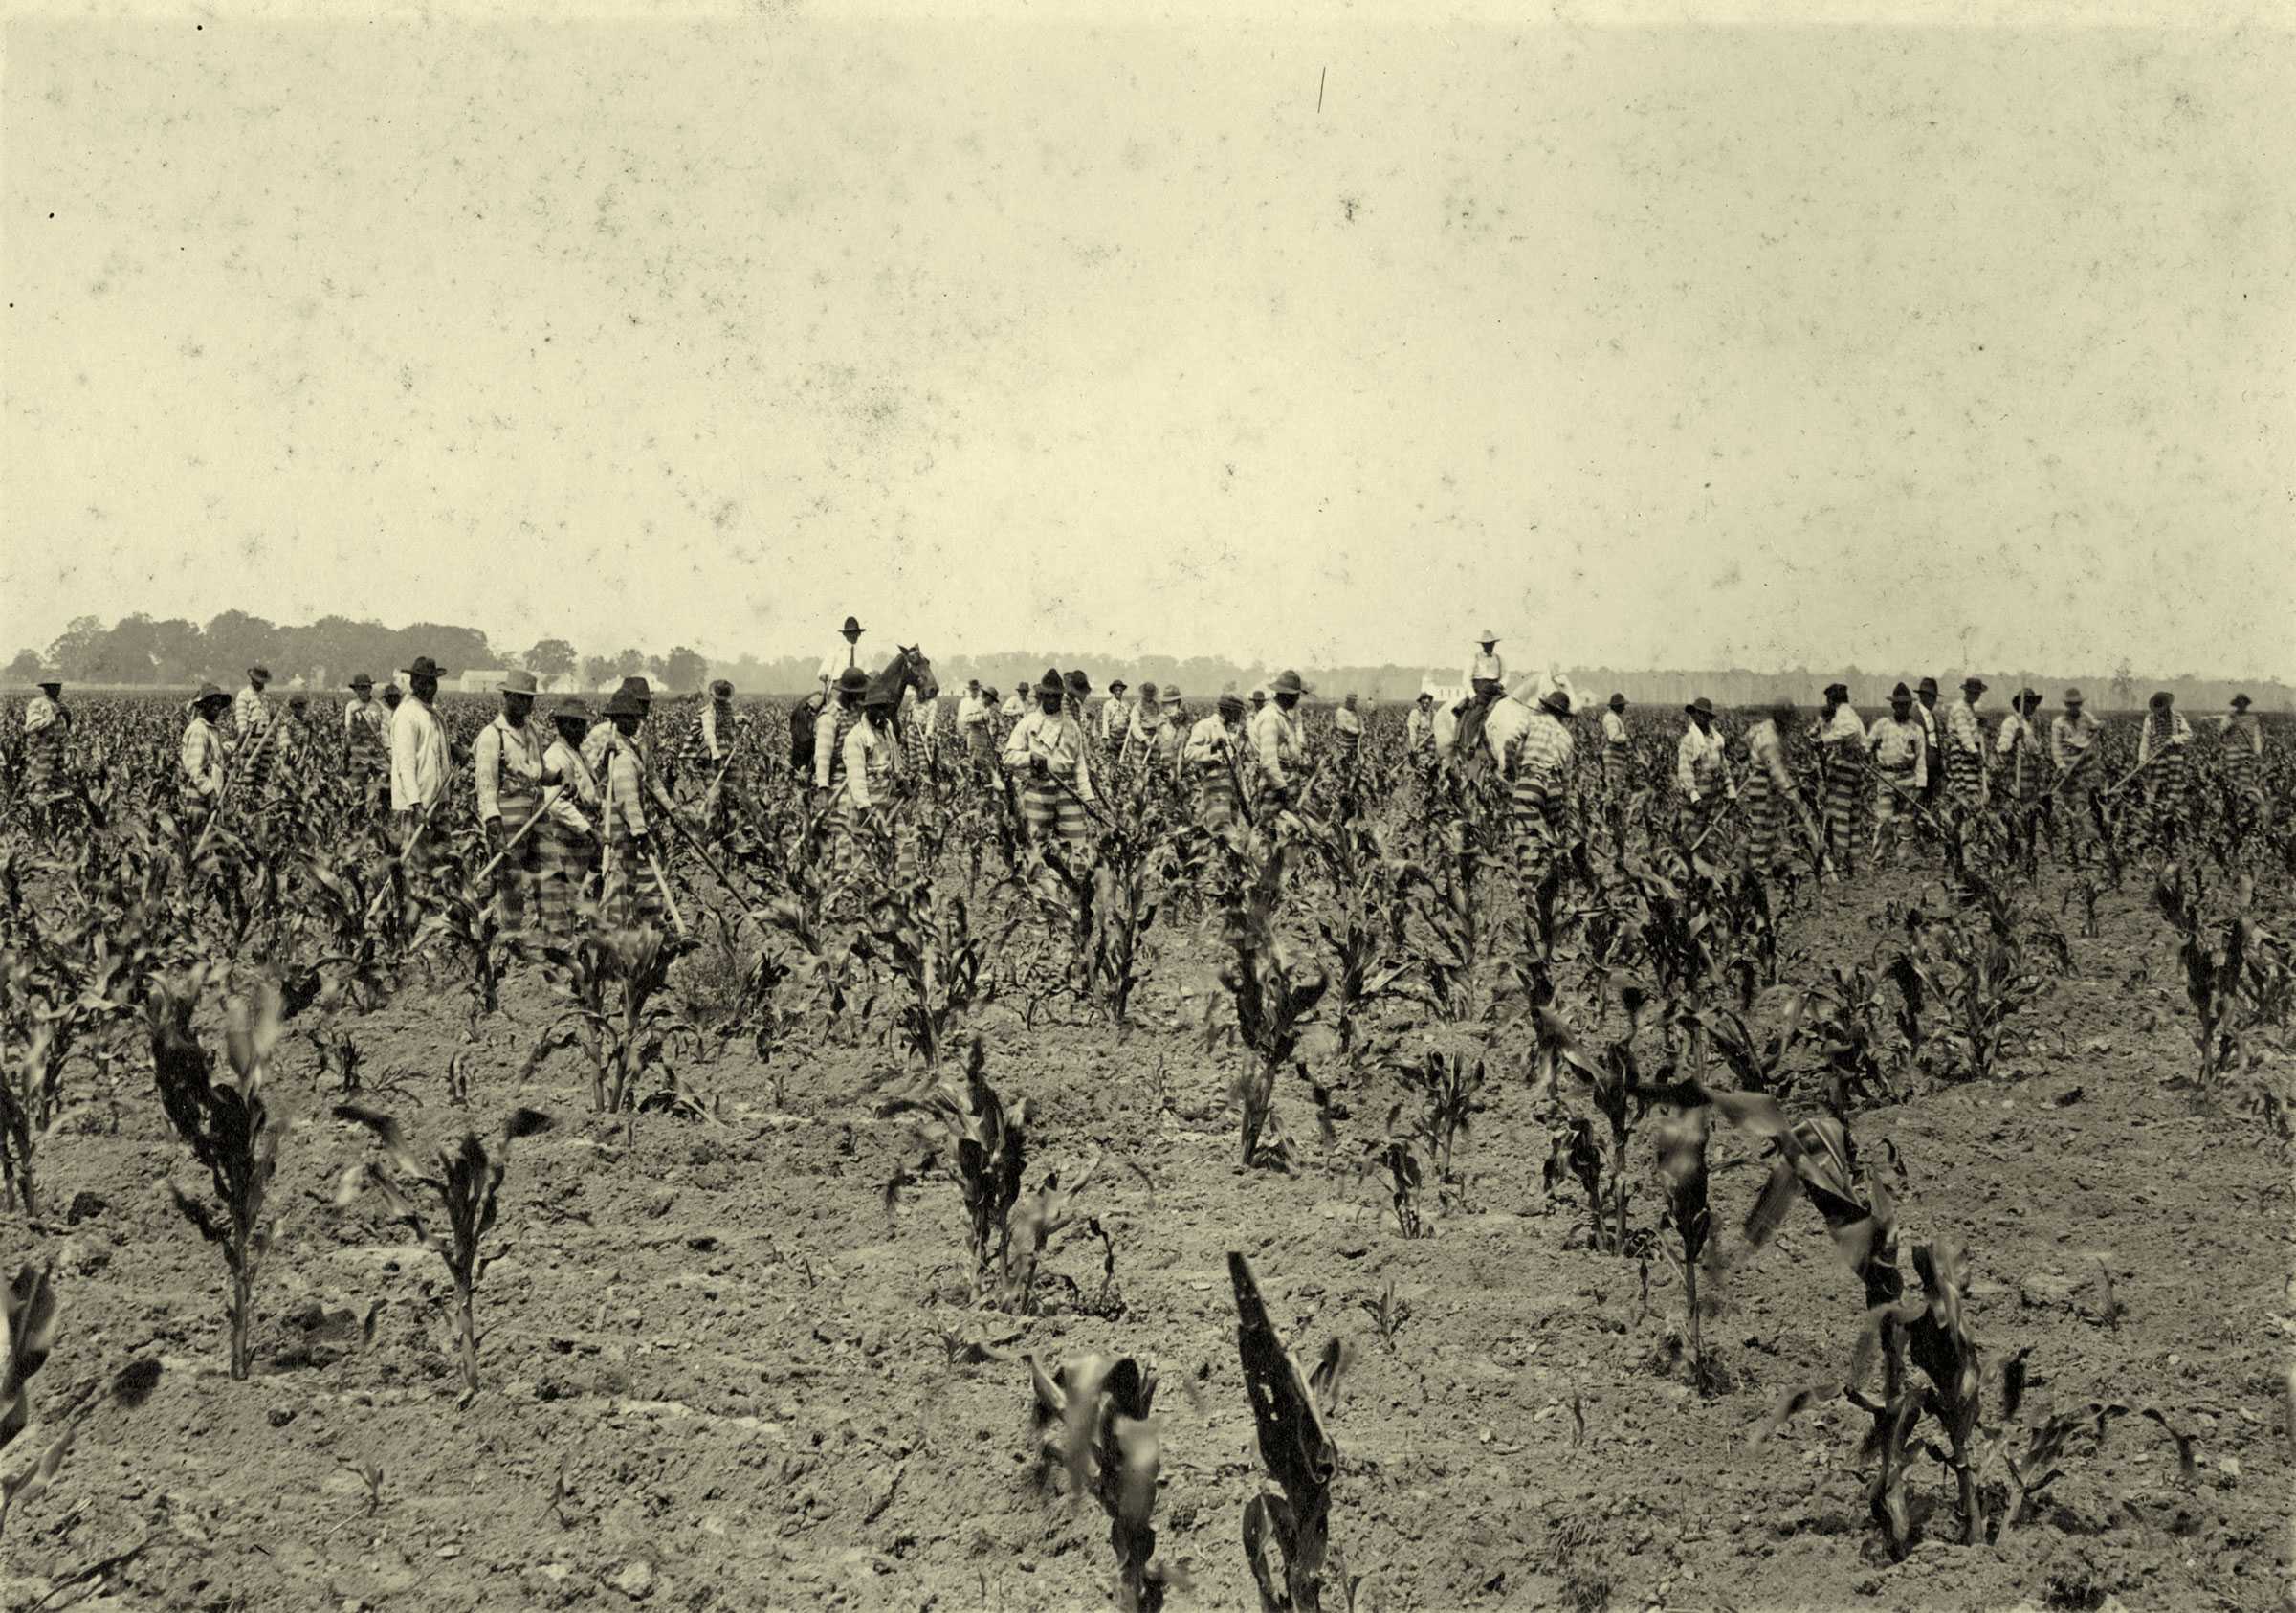 A photo of workers working on a plantation in striped pants and white shirts. A few guards on horses oversee them.